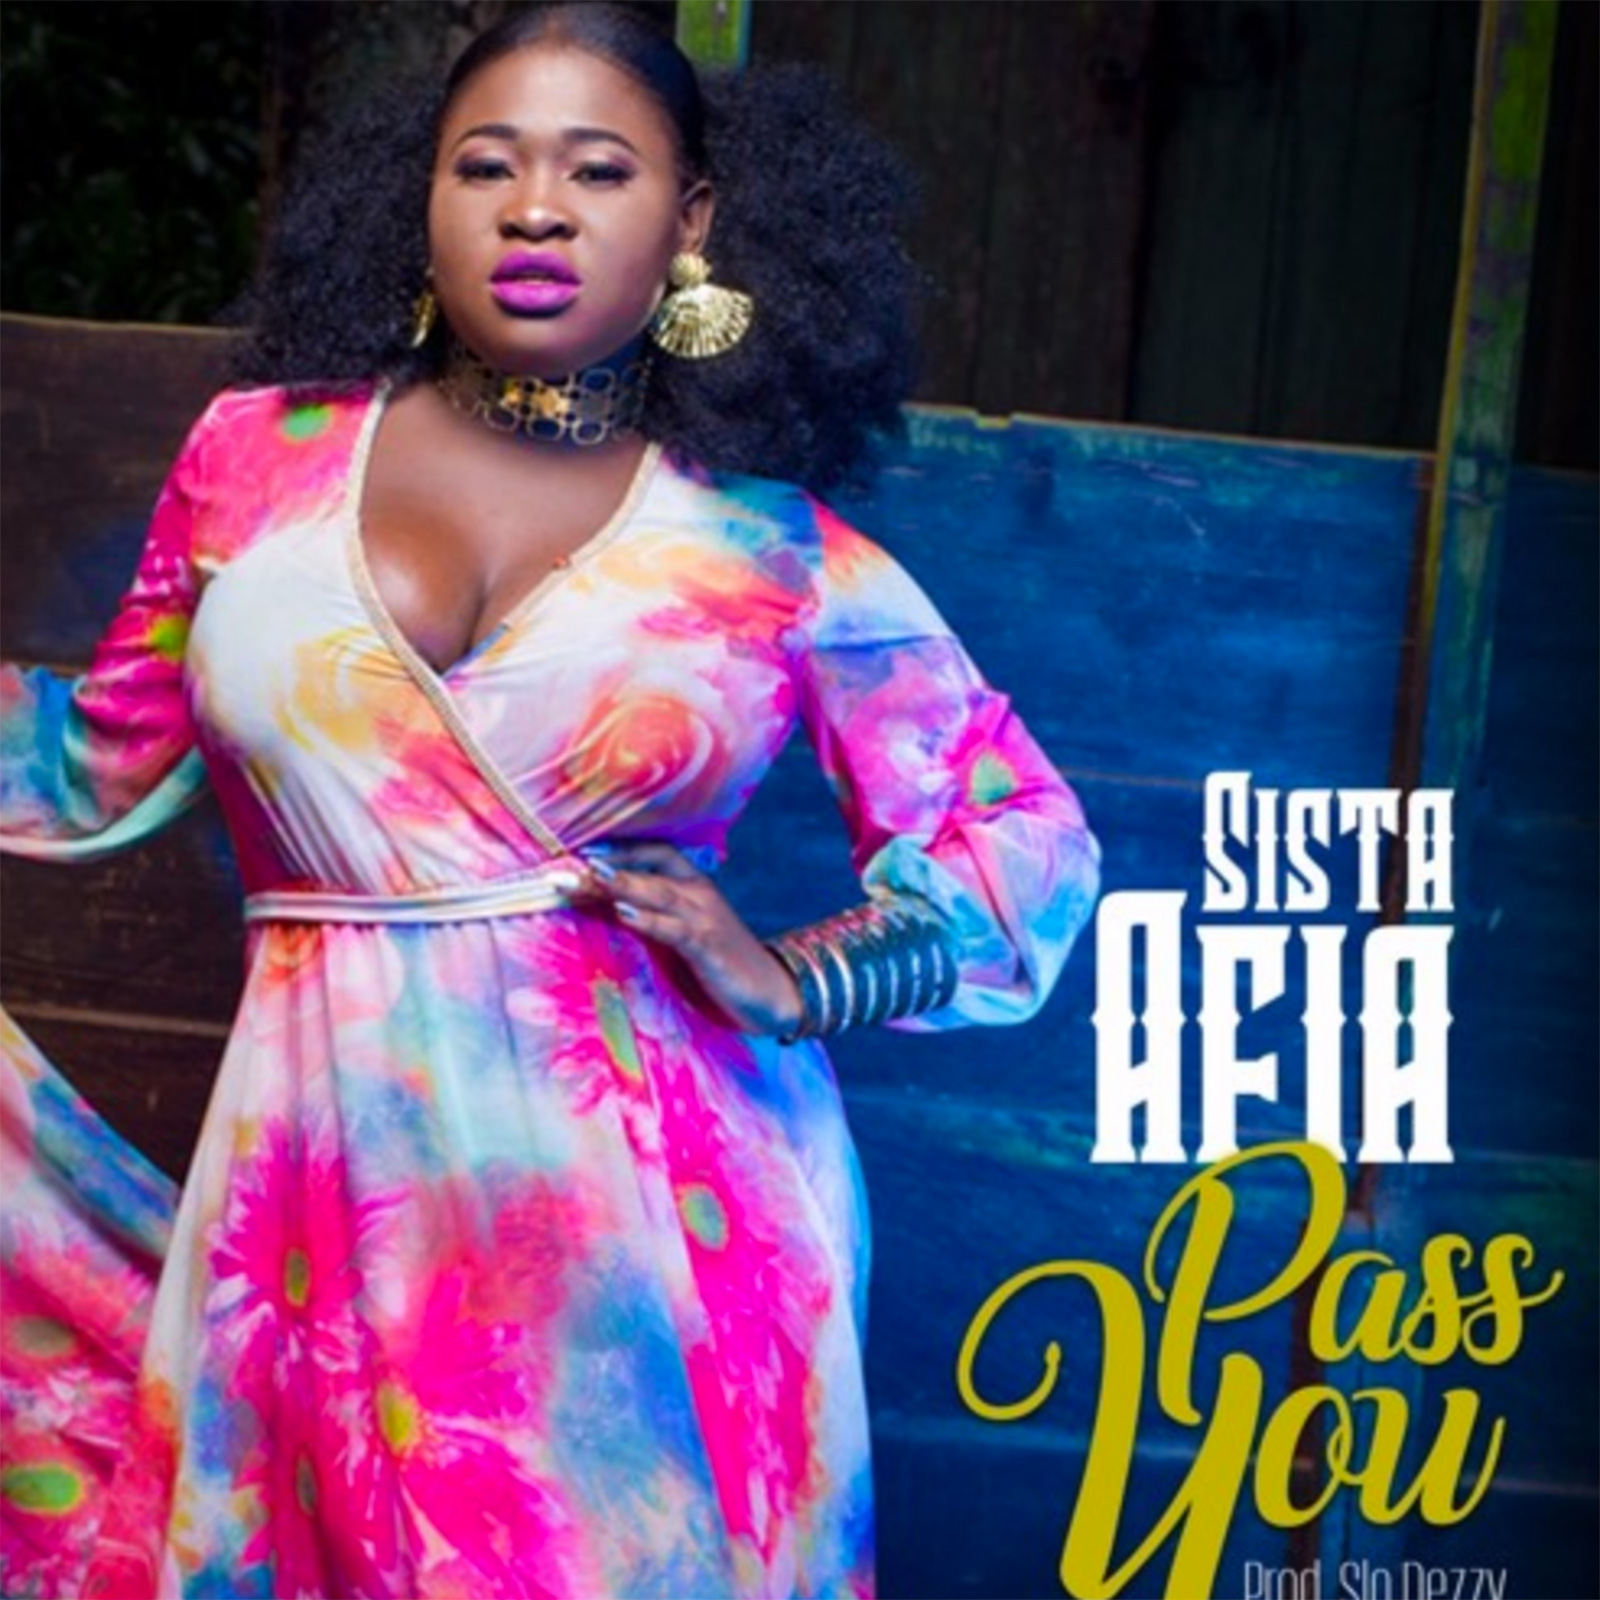 Pass You by Sister Afia